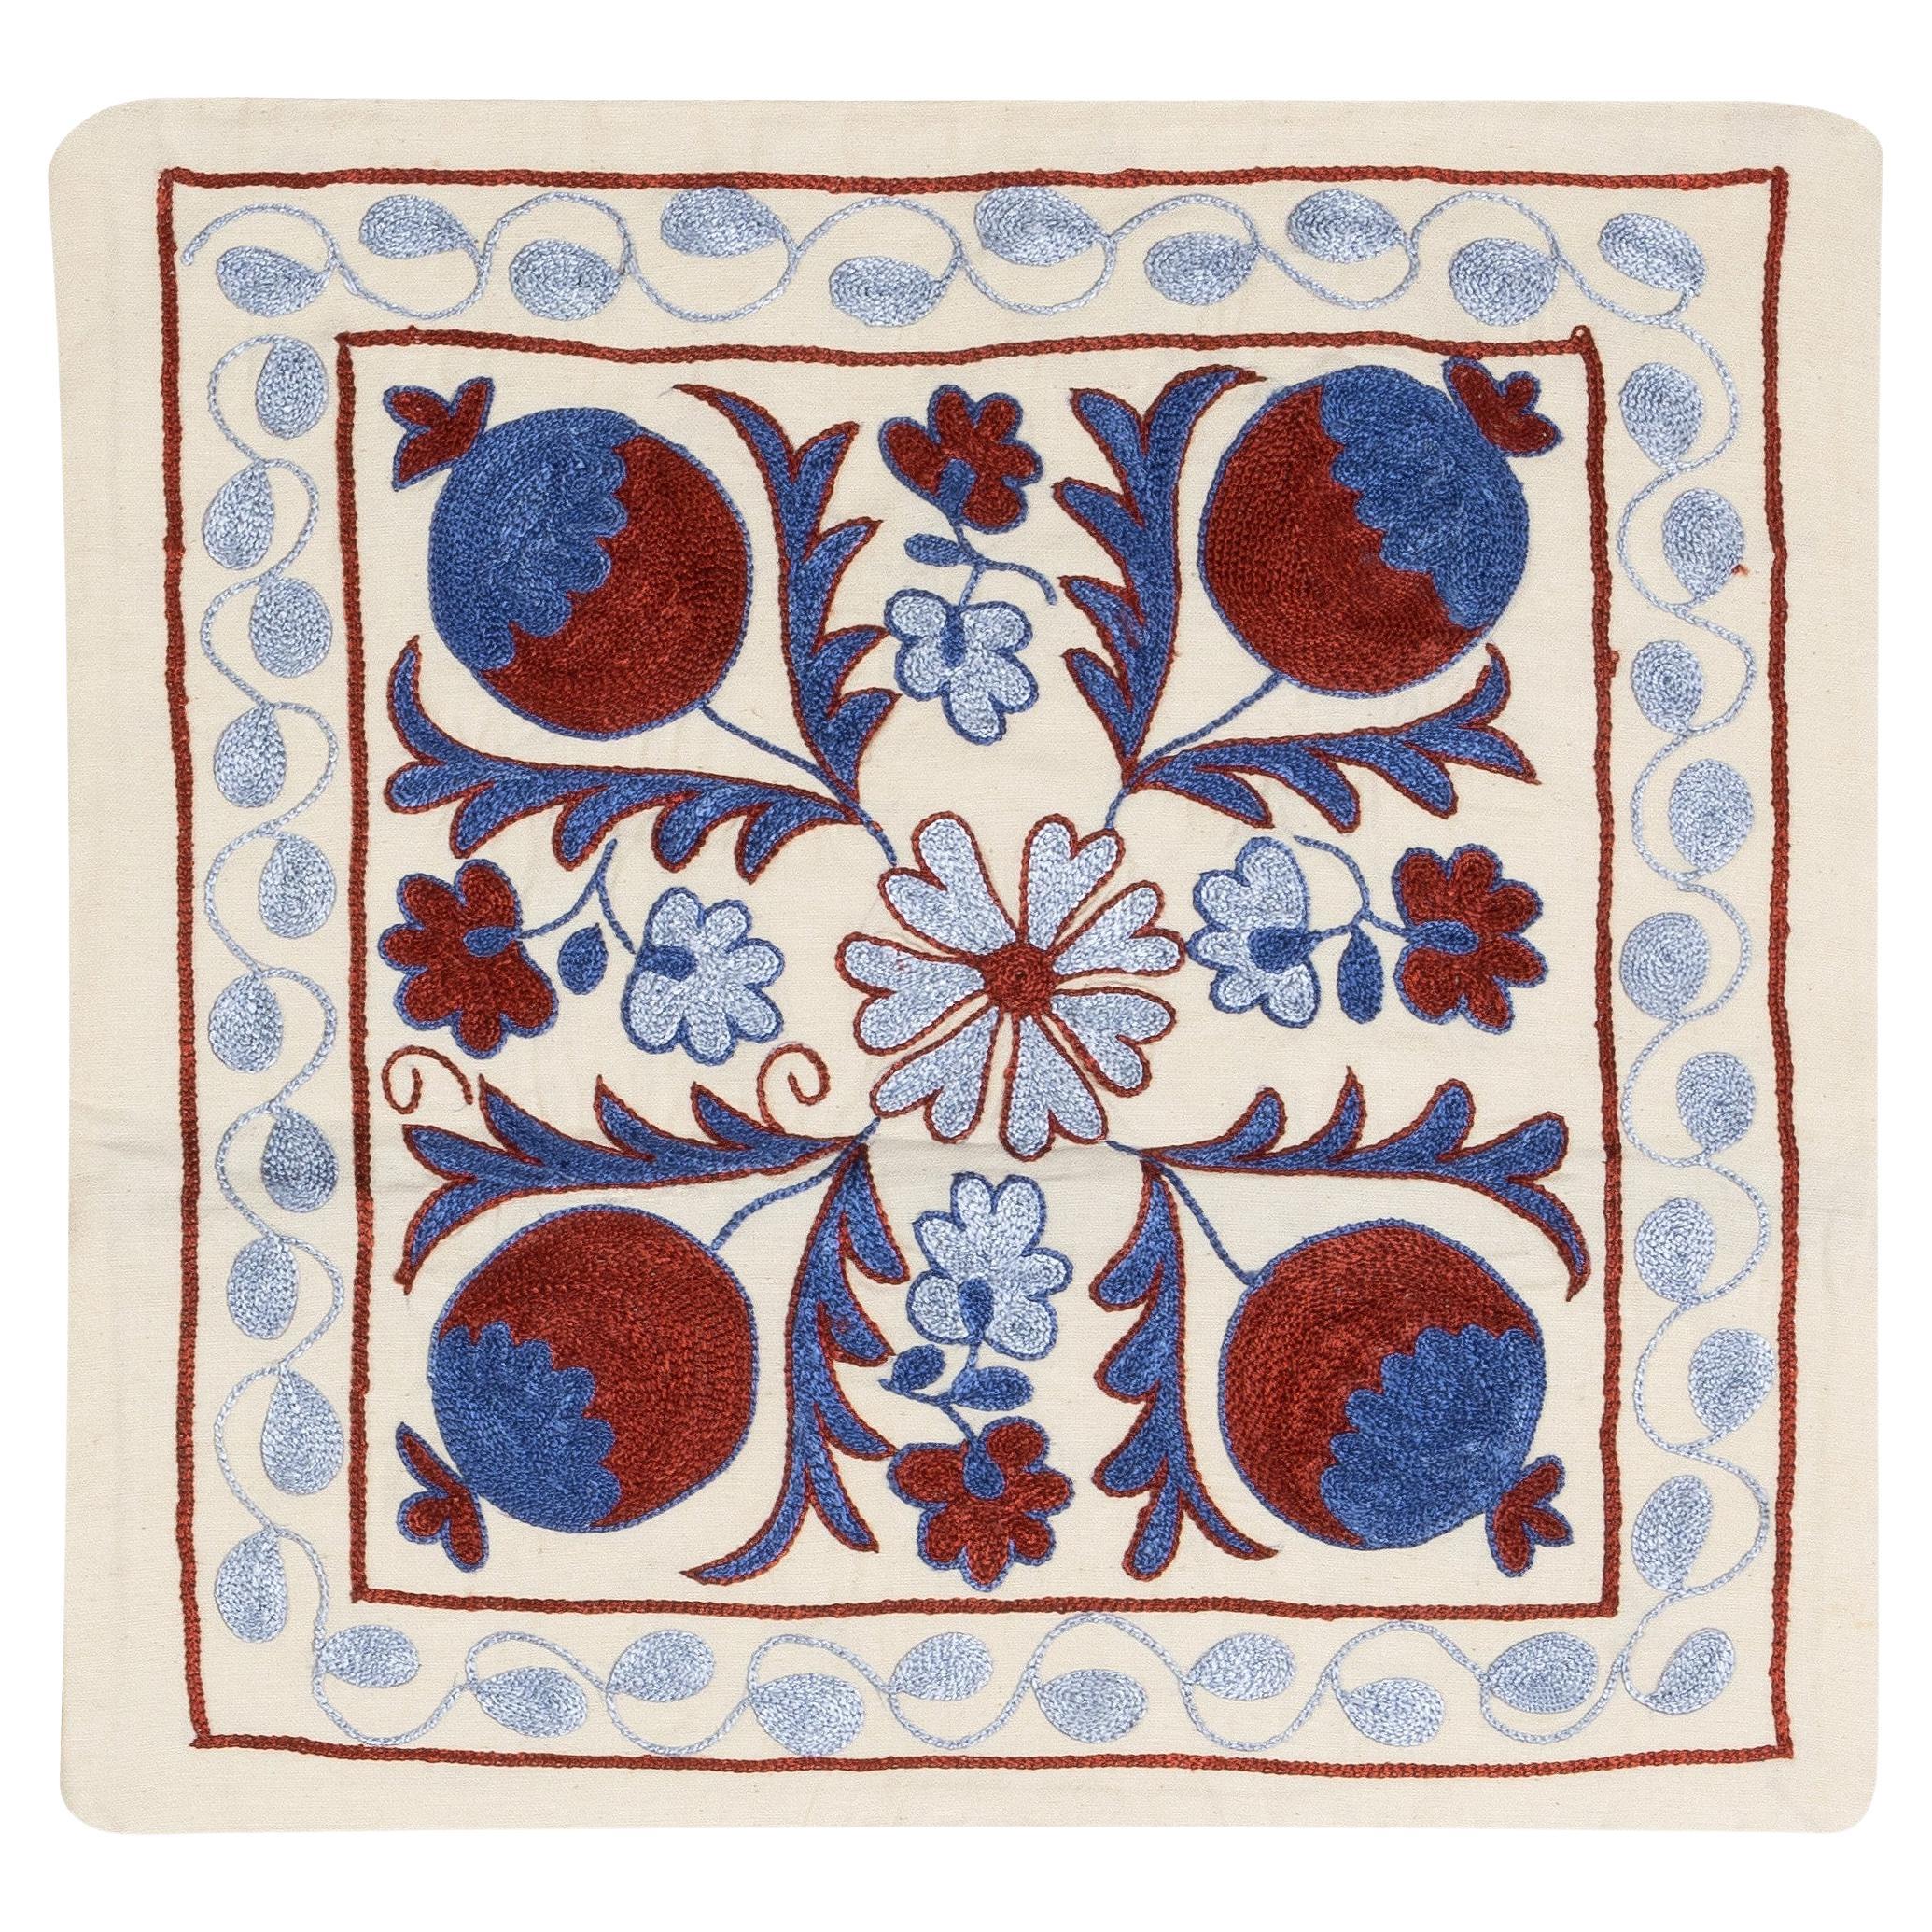 19"x19" Embroidered Silk Cushion Cover, Cotton Sham in Blue, Red and Cream For Sale